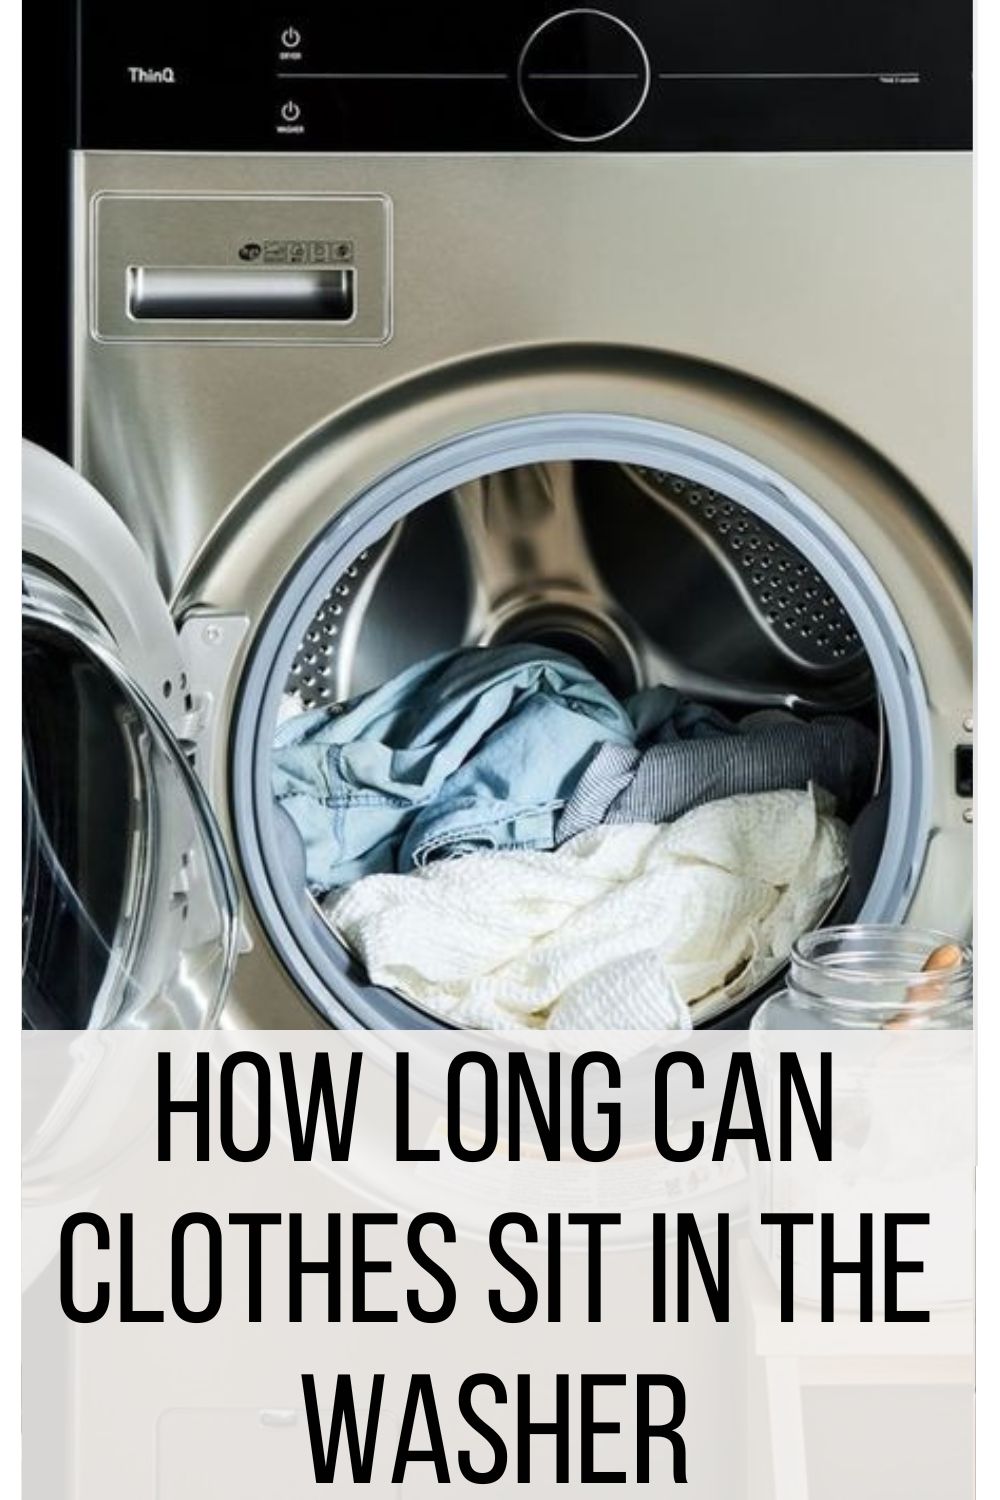 How Long Can Clothes Sit in the Washer